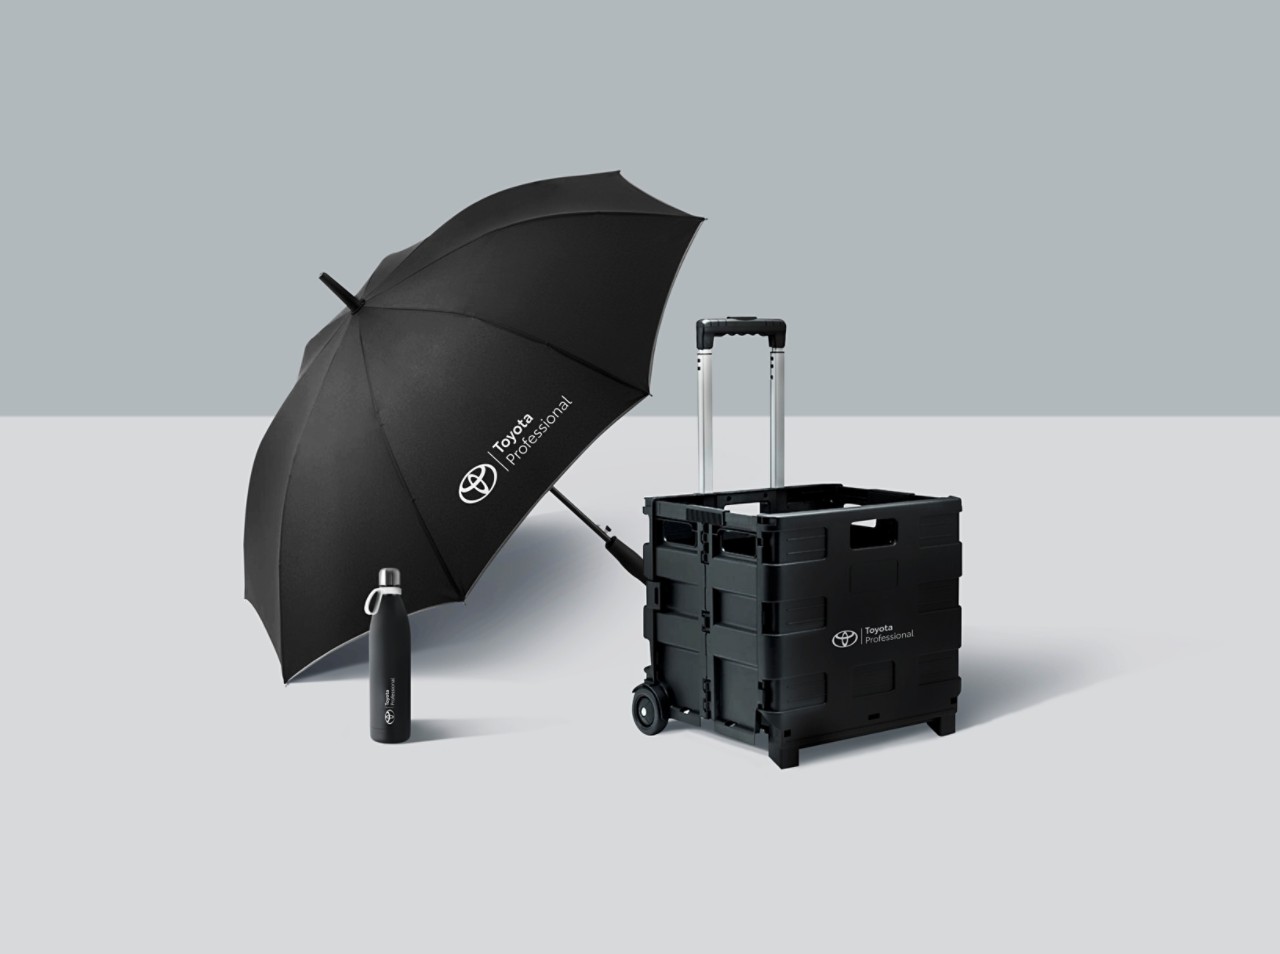 Toyota professional branded umbrella, water bottle and trolley 